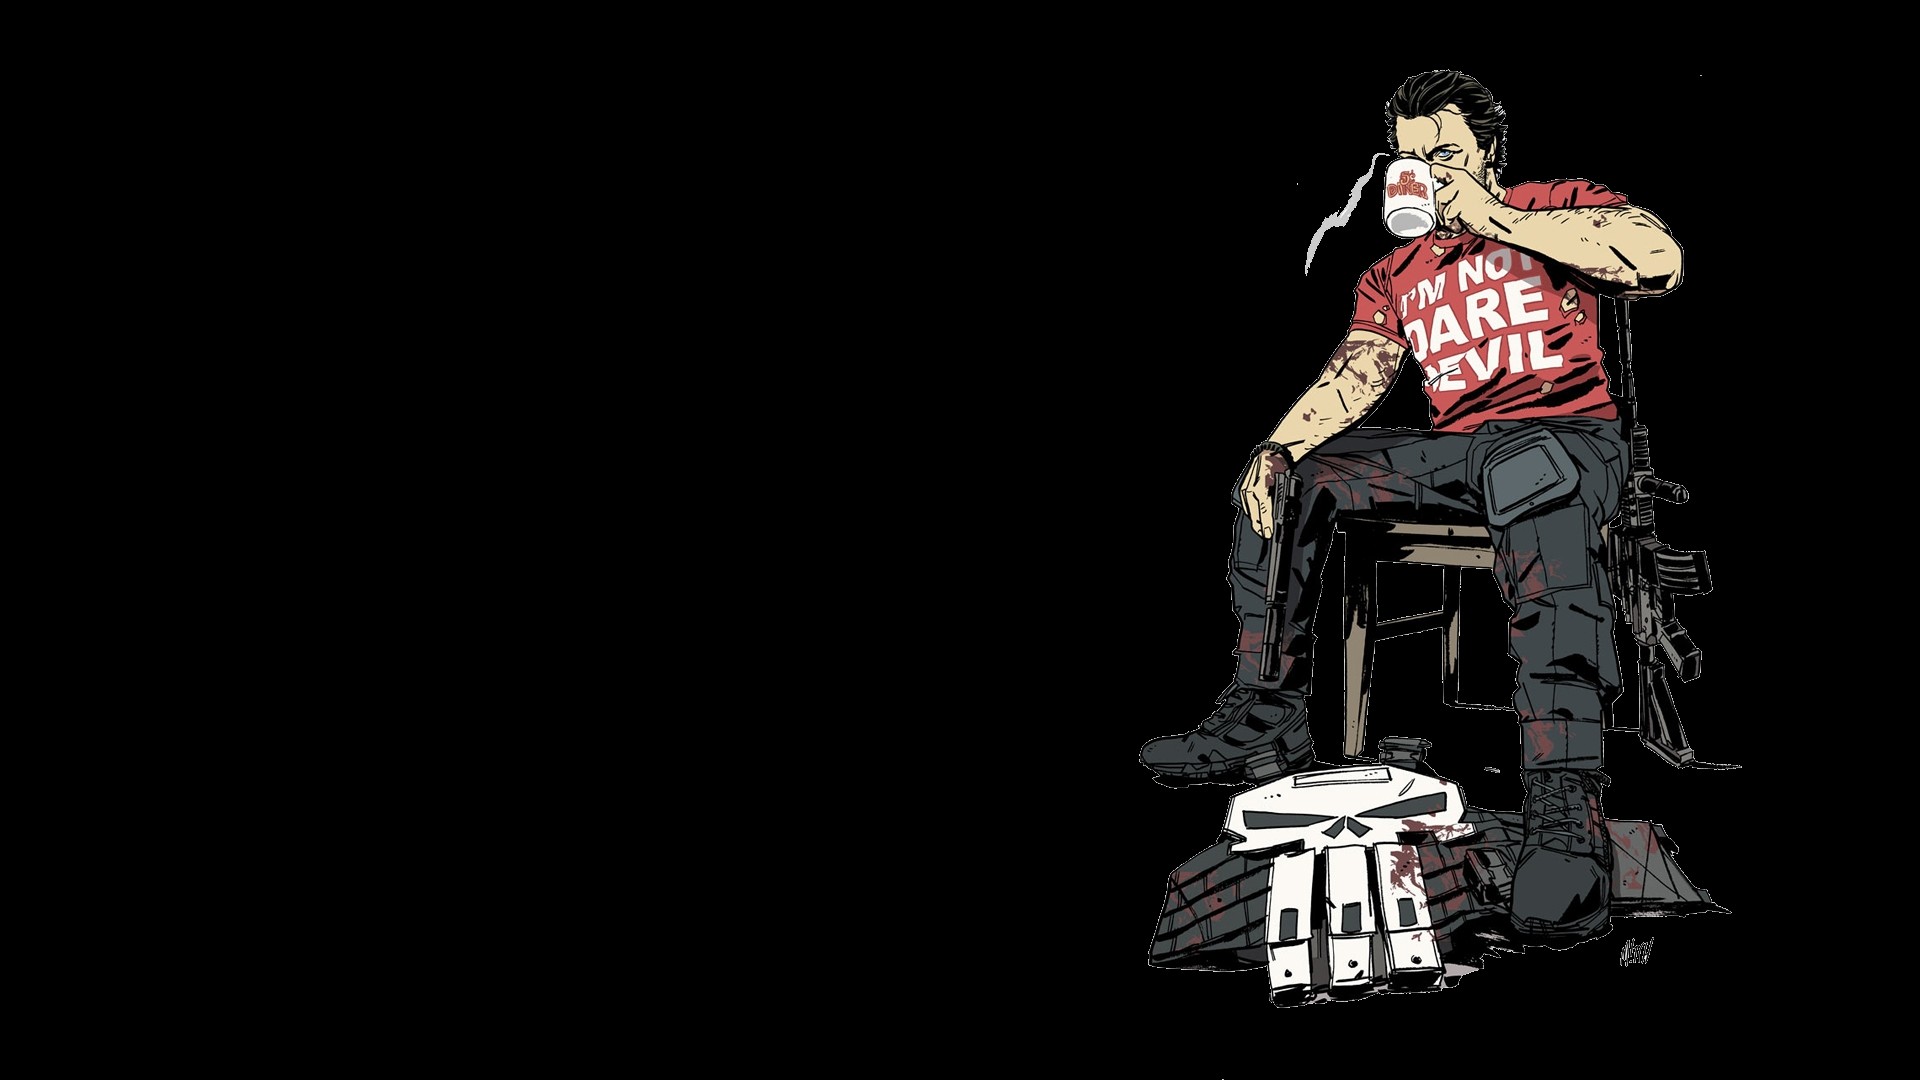 1920x1080 The Punisher Computer Wallpapers, Desktop Backgrounds |  | ID .